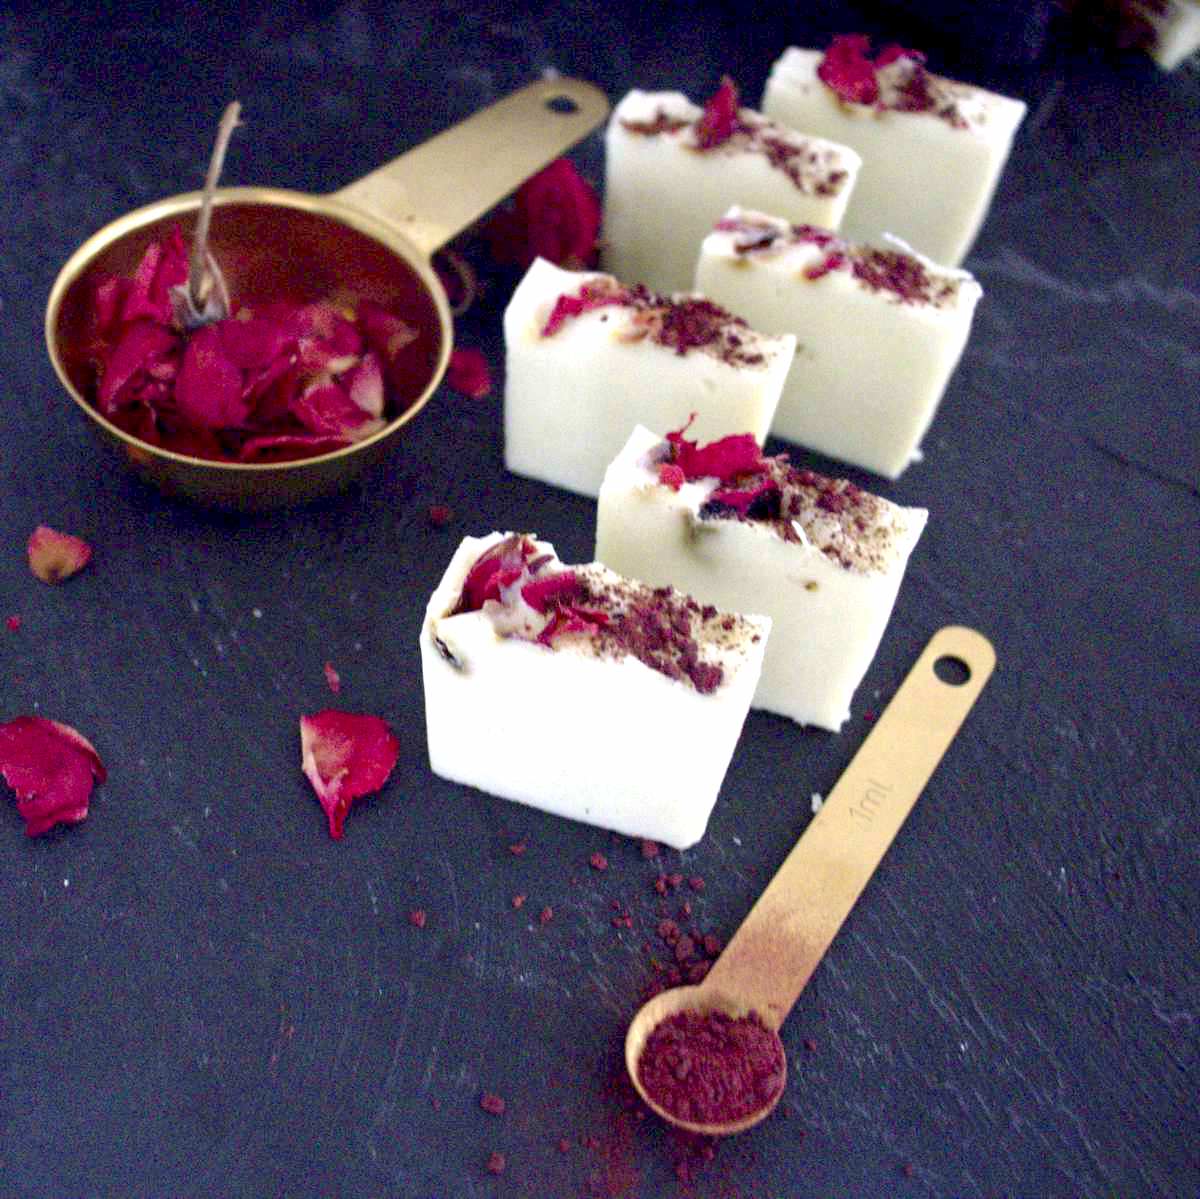 White rose soap bars with rose petals on the side.